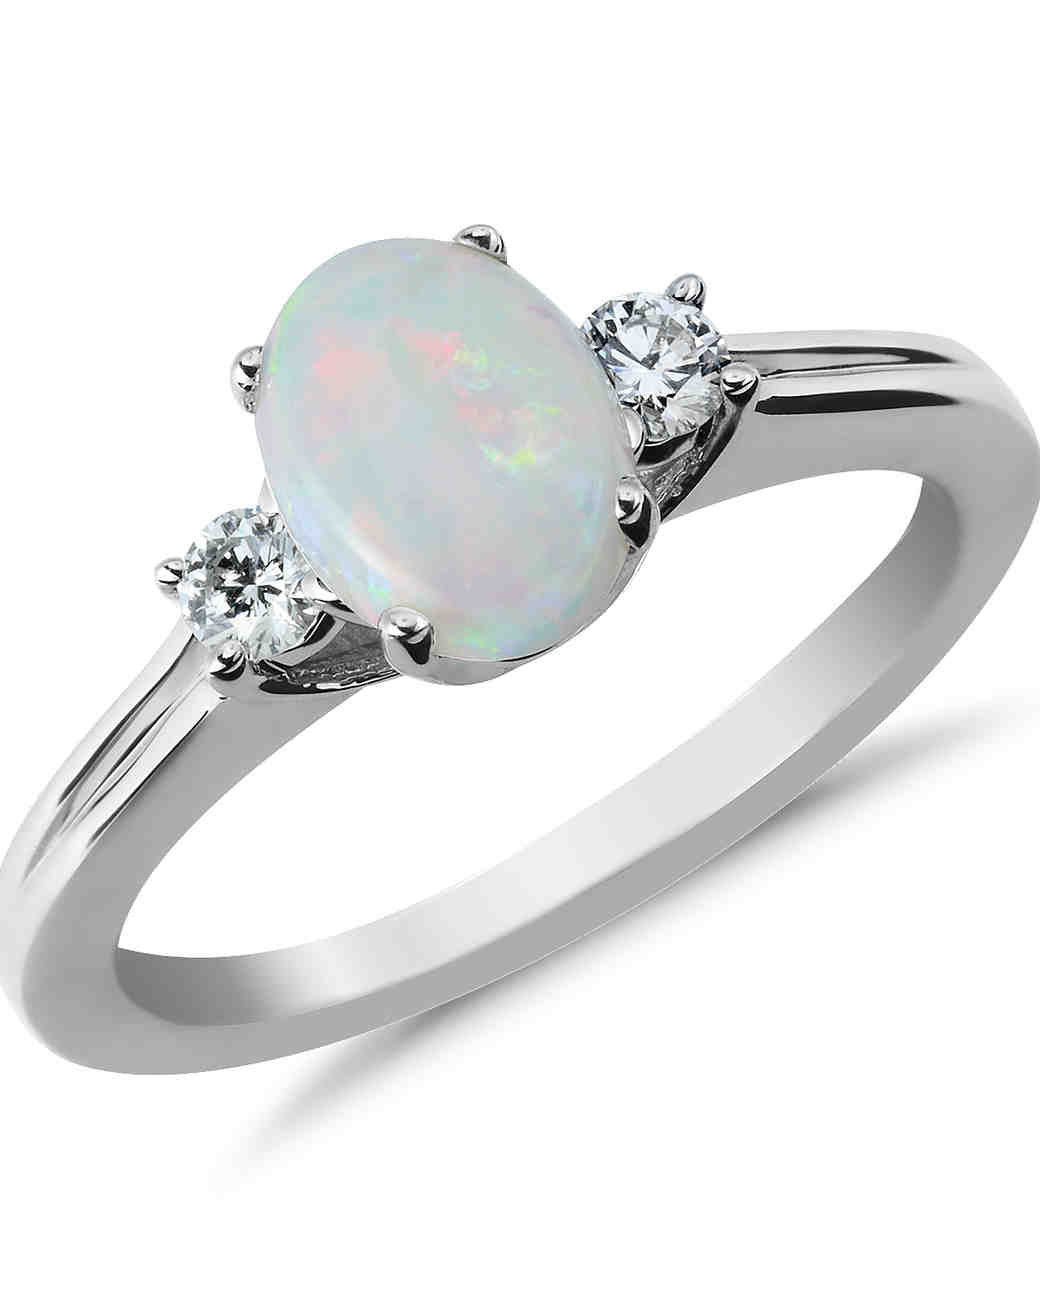 Opal And Diamond Engagement Ring
 25 Unique Opal Engagement Rings